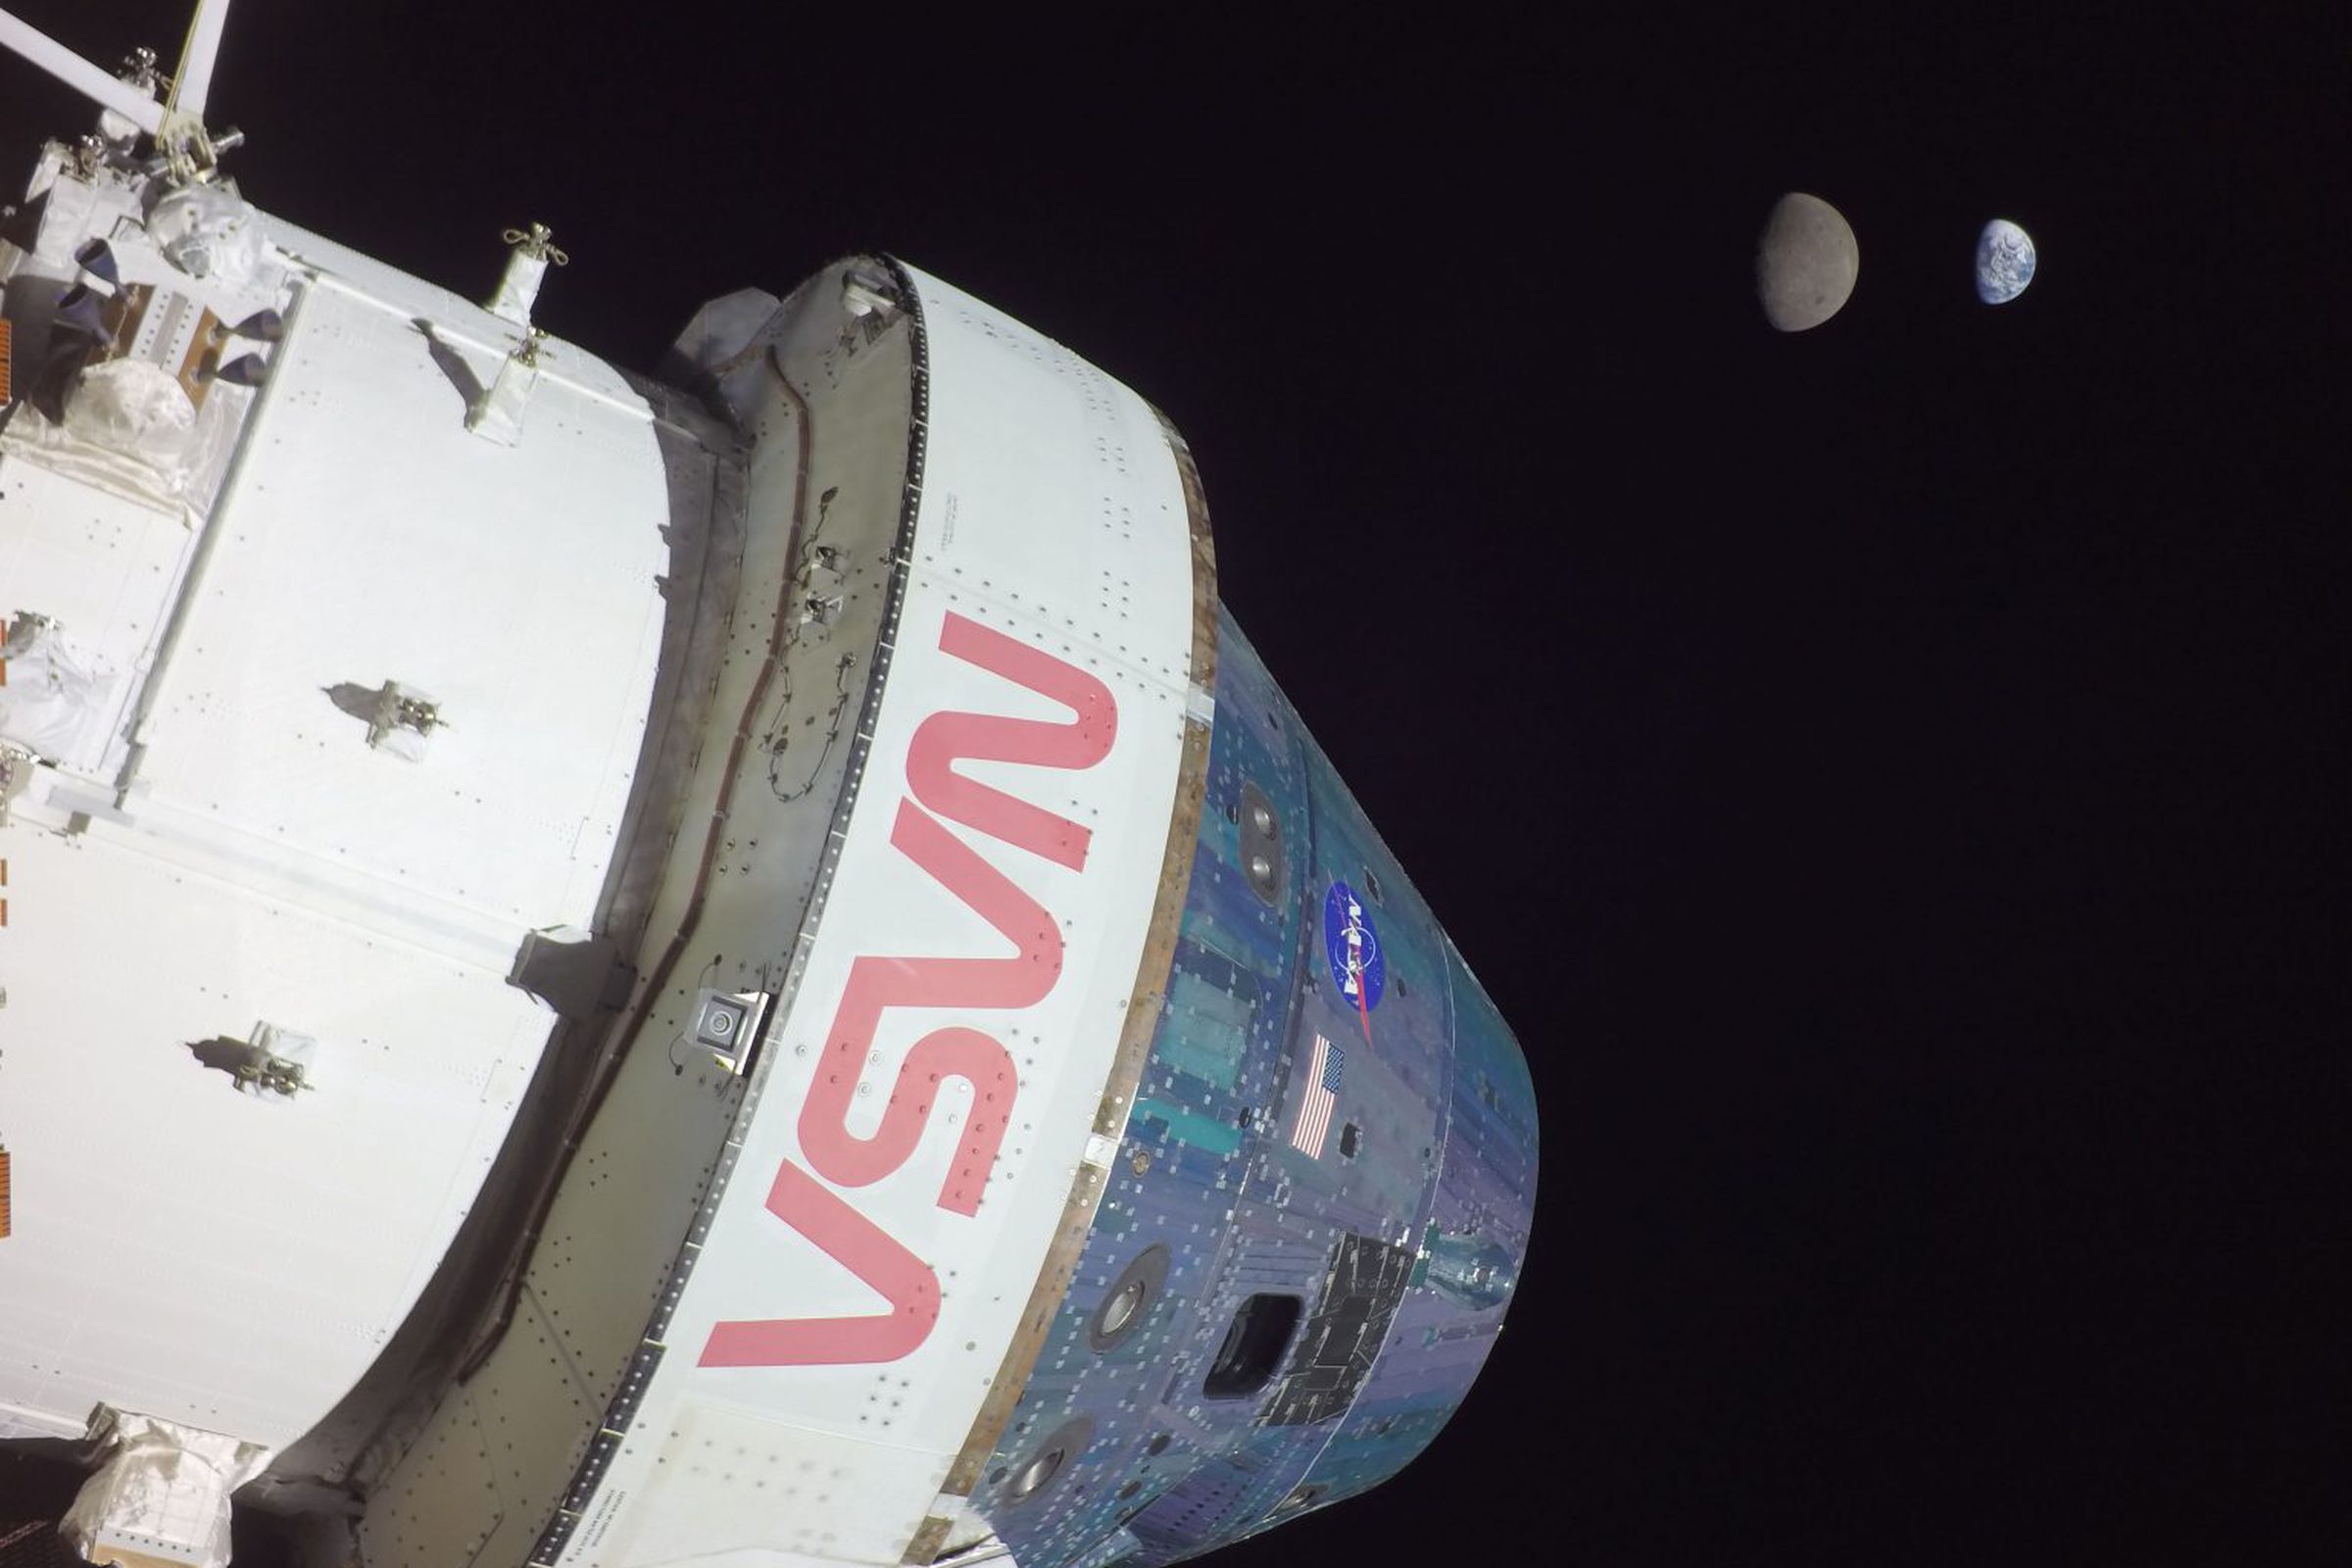 The exterior of the Orion capsule, with the Moon and Earth in the distance.